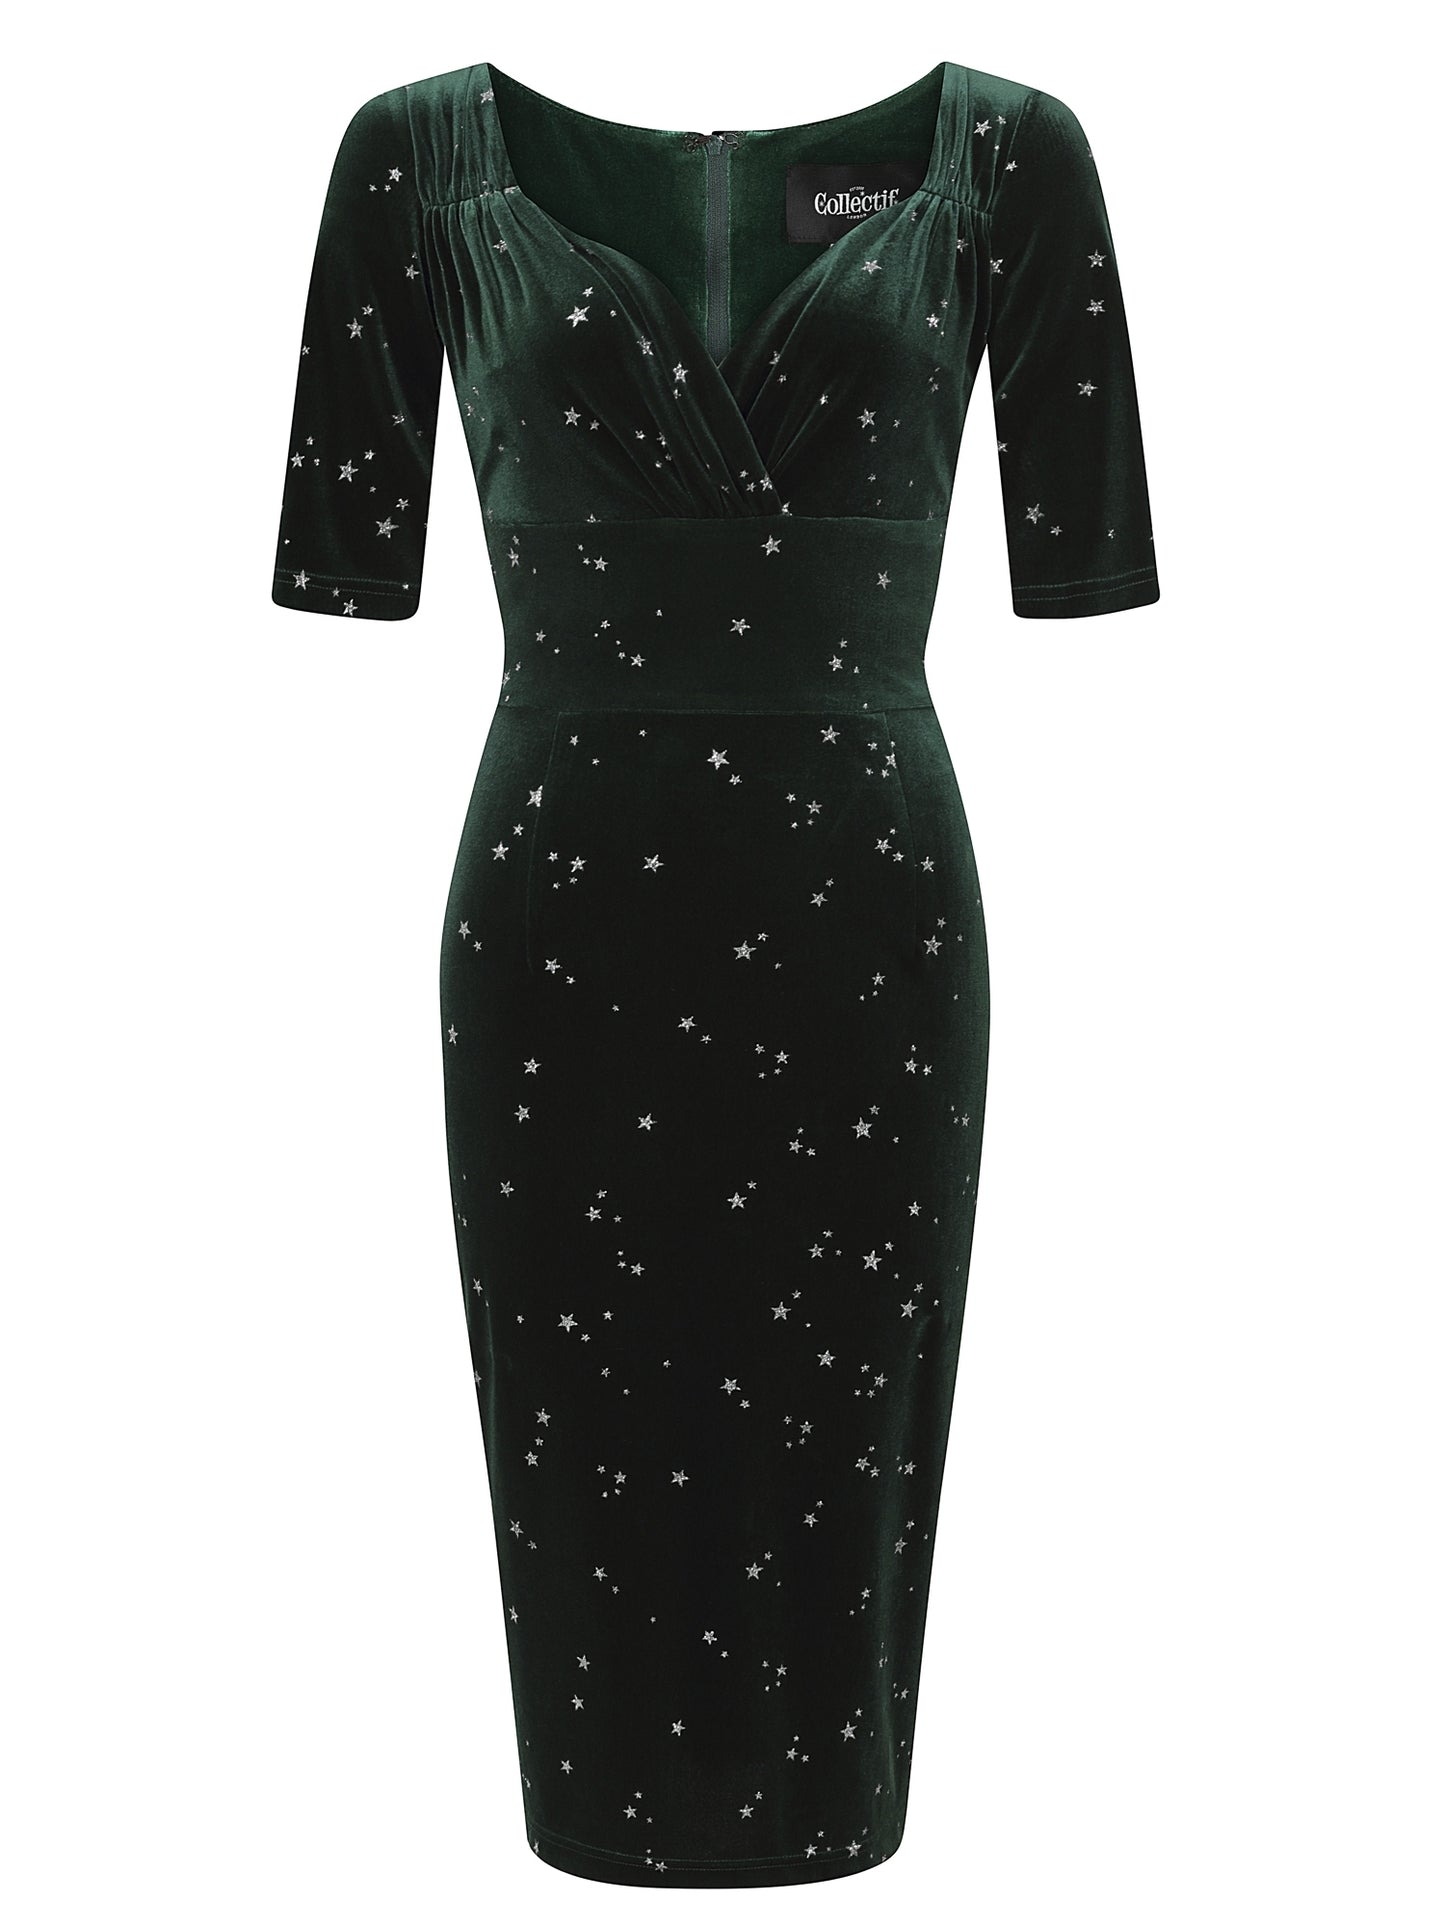 Trixie Glitter Star Velvet Pencil Dress by Collectif